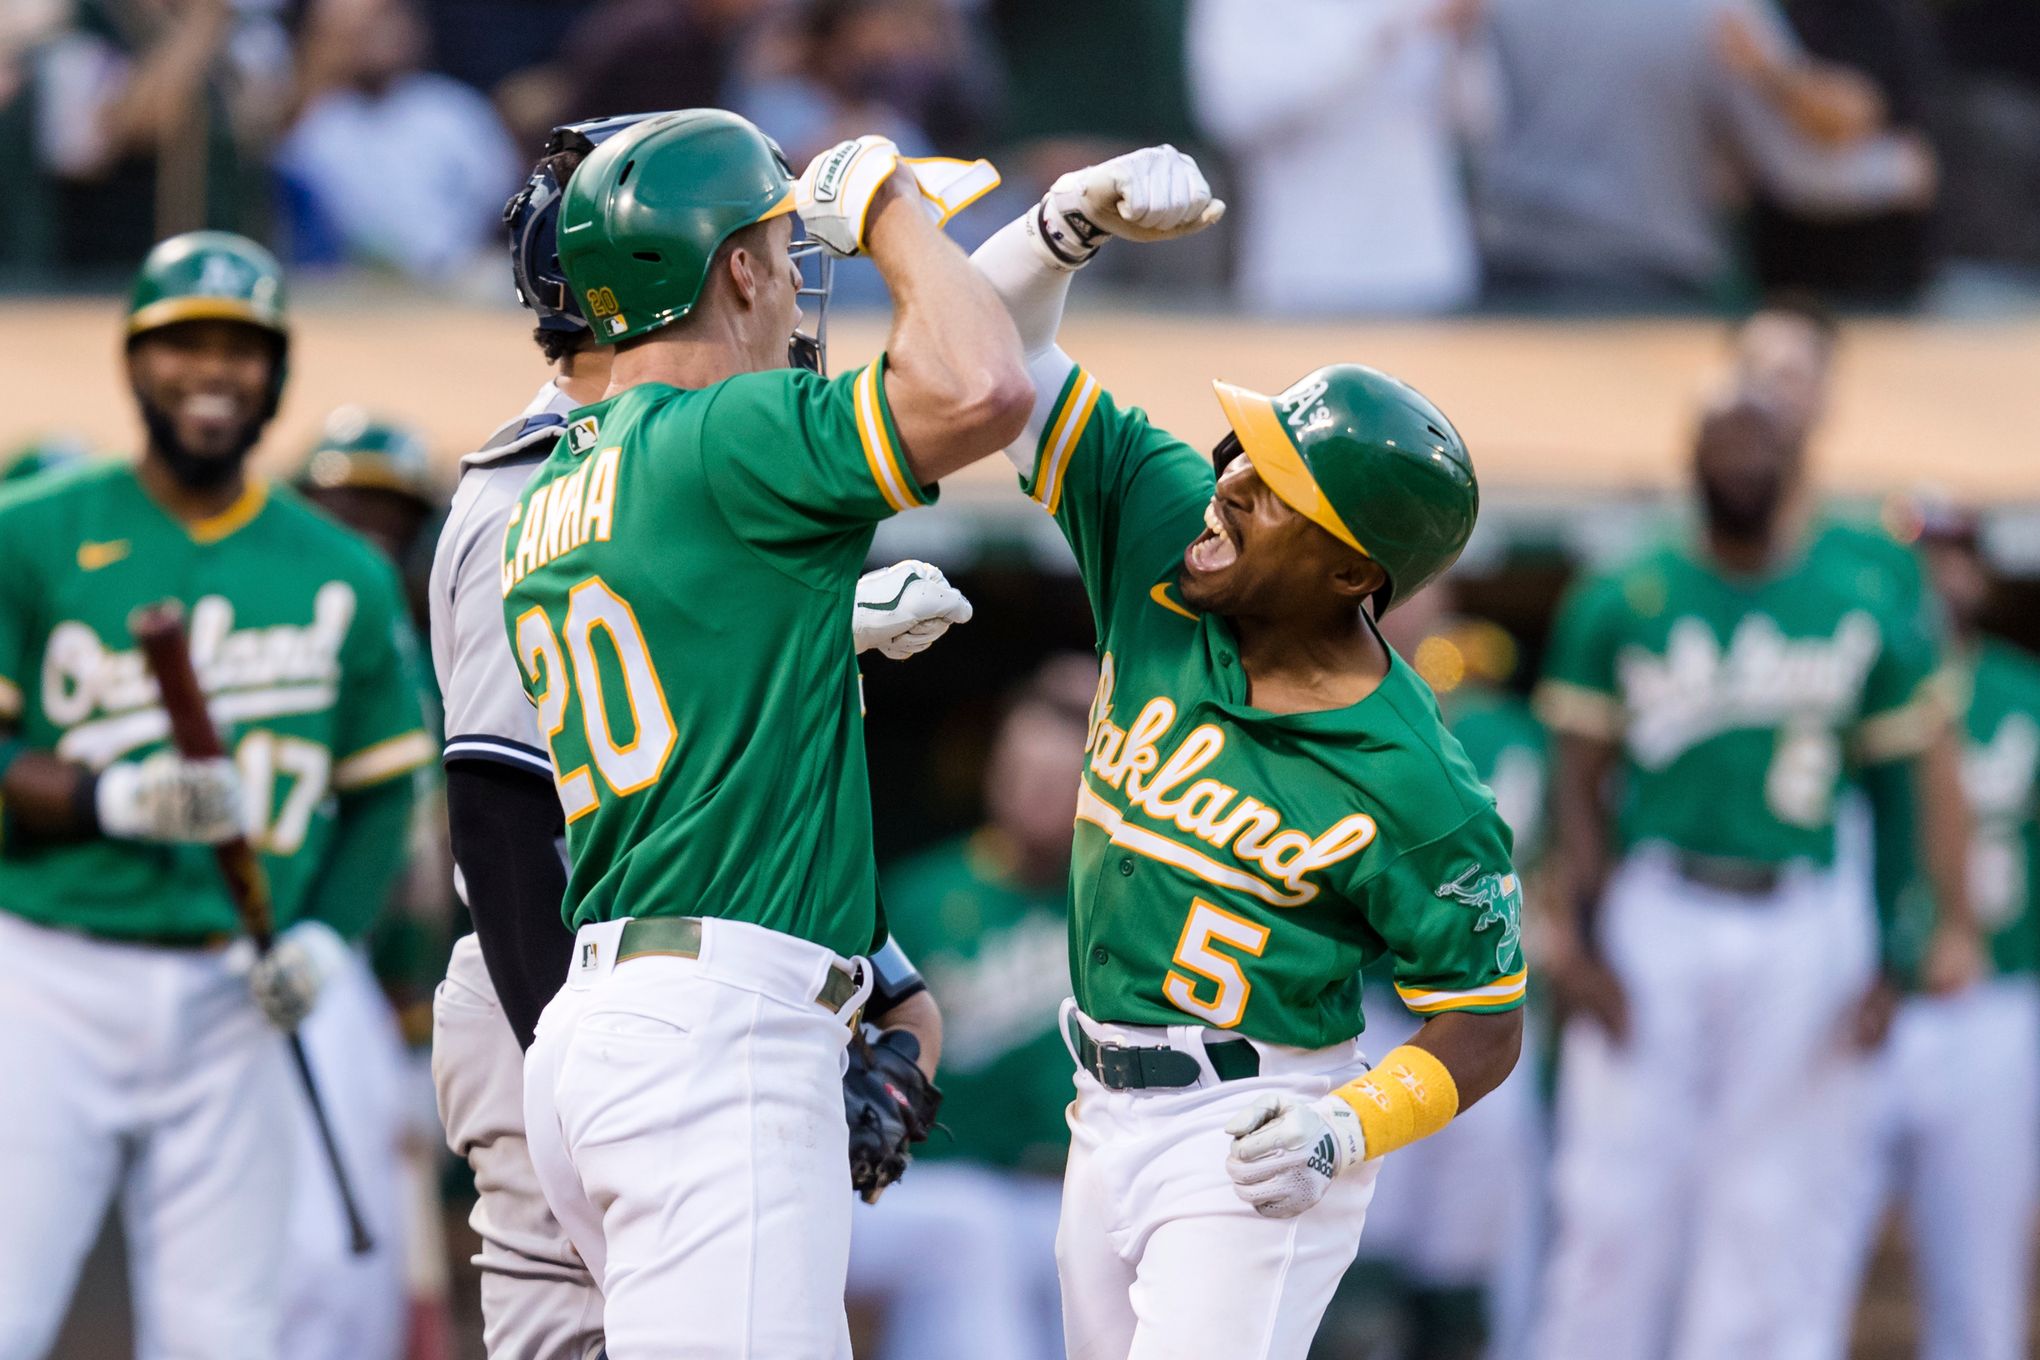 Kemp HR in 8th, A's beat Yankees for 2nd straight day